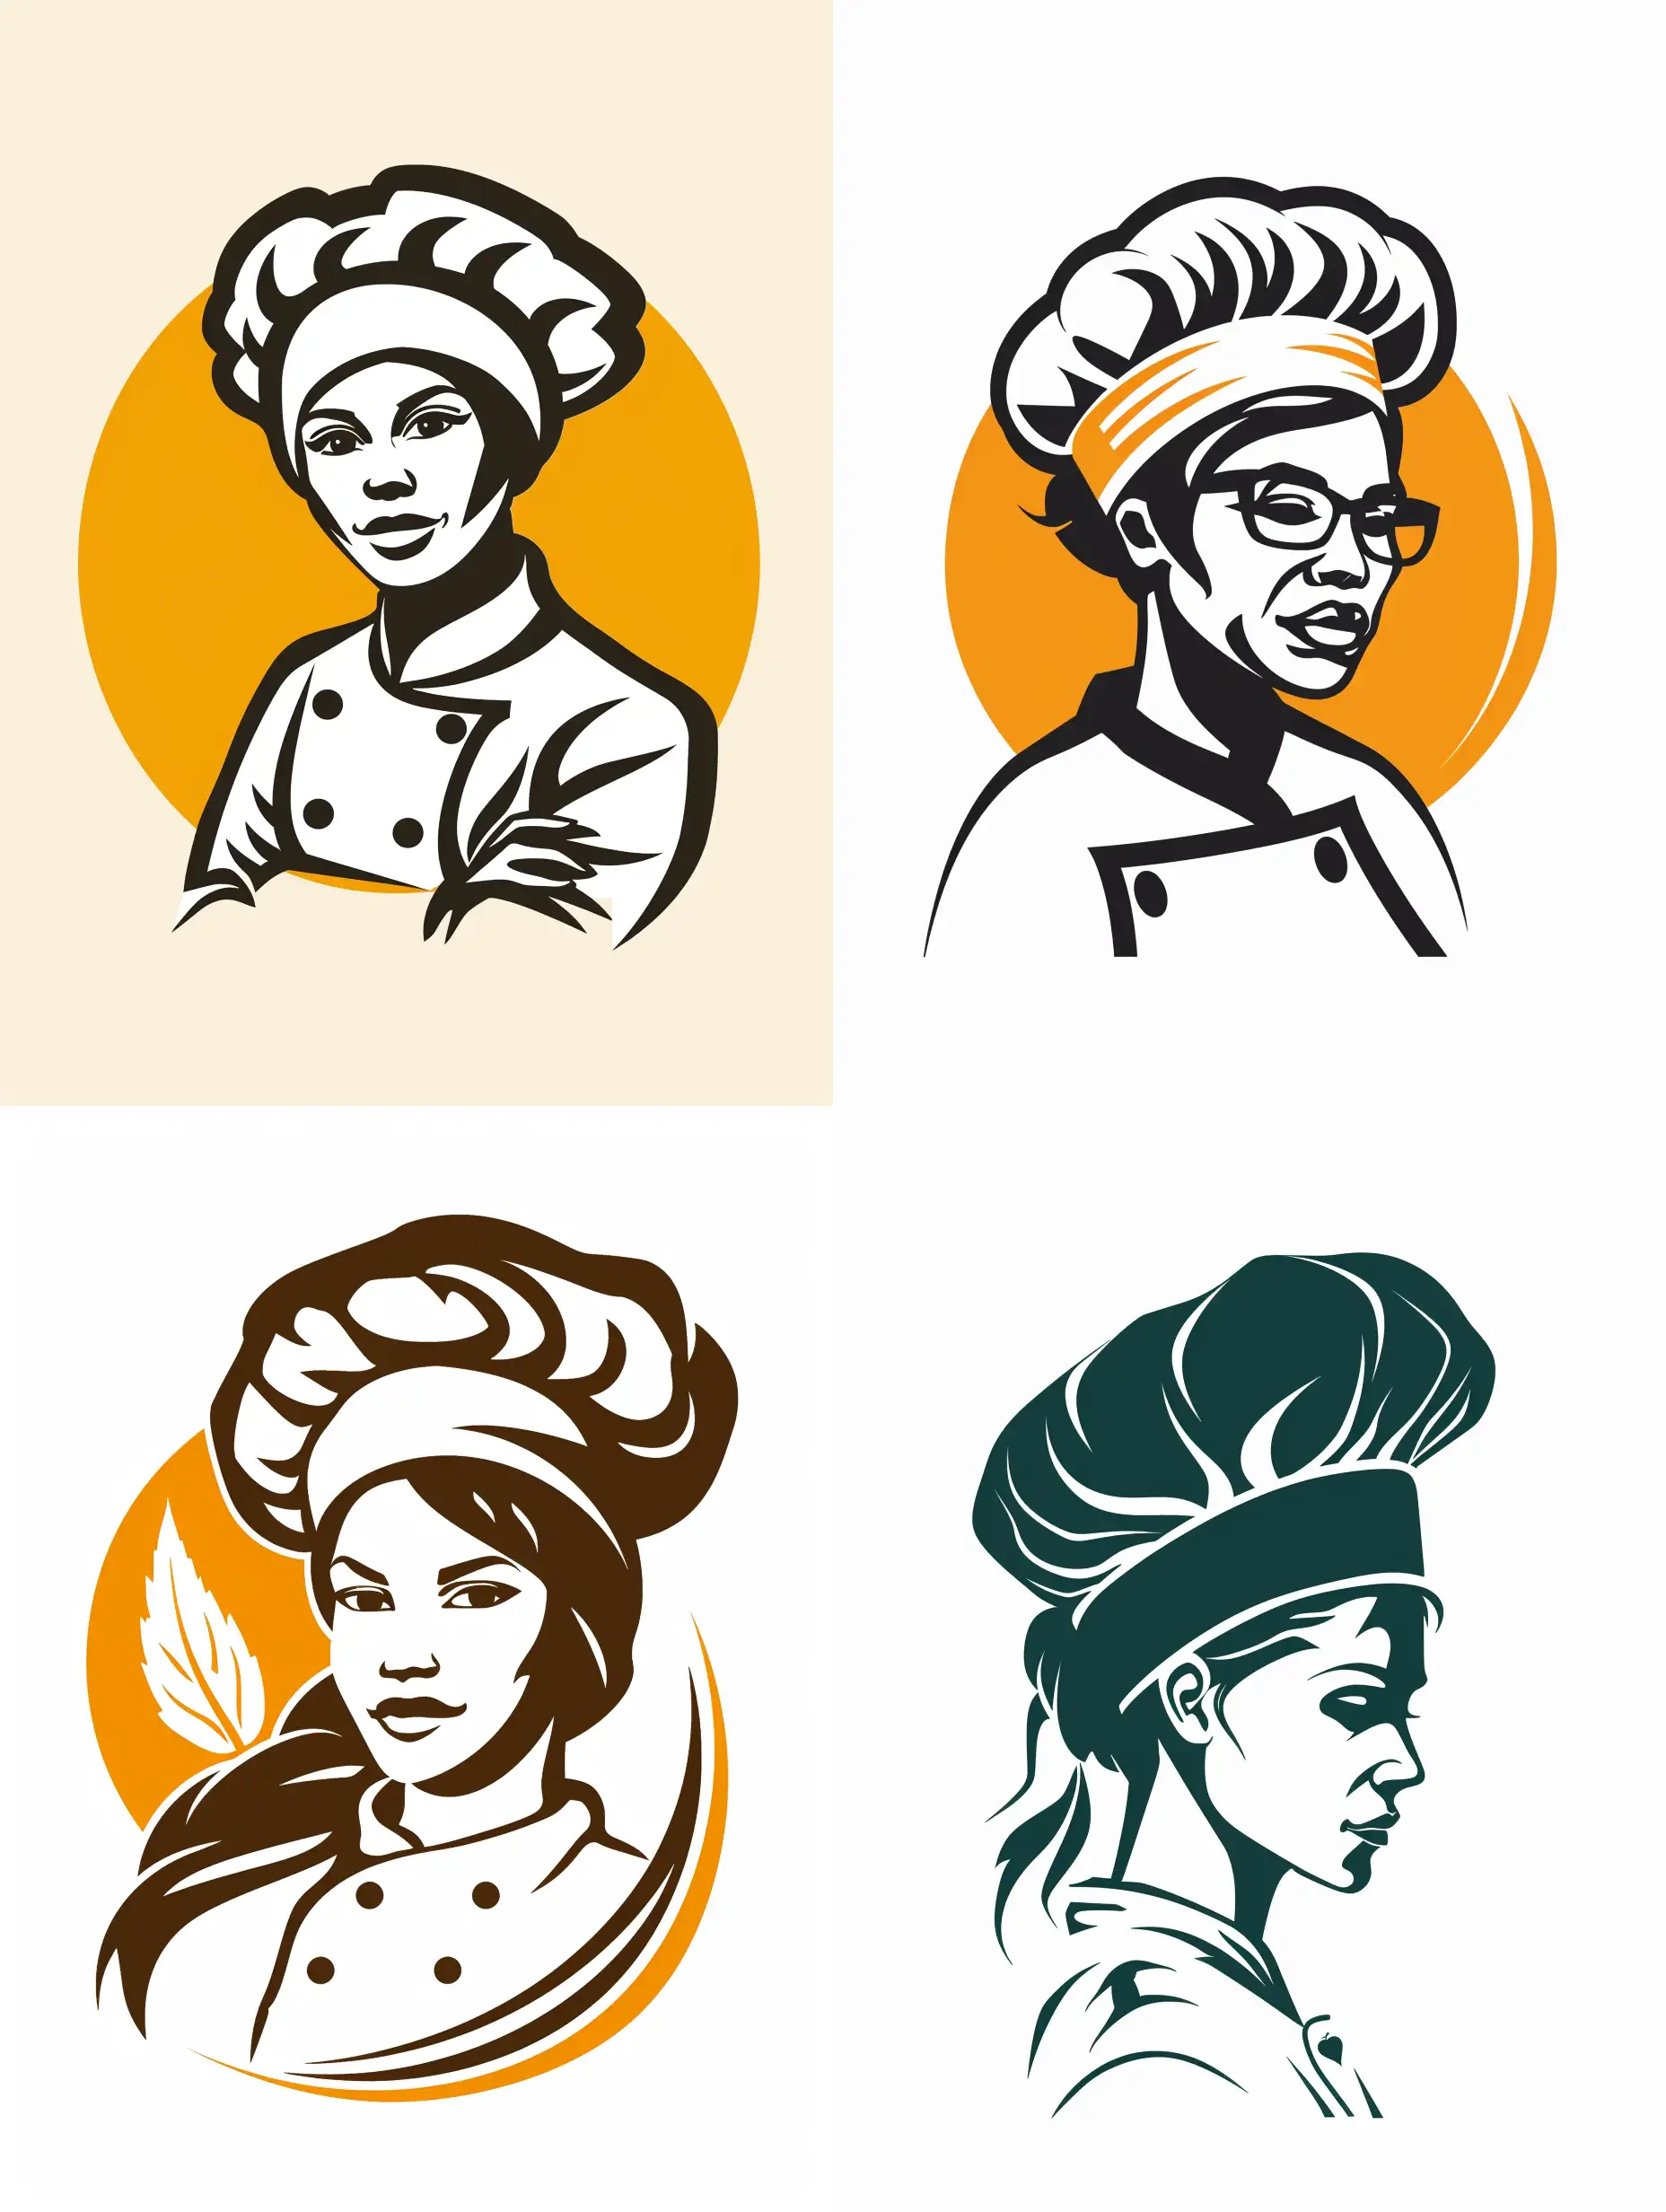 "Create a logo that embodies the essence of a skilled and passionate woman chef, reflecting the warmth and flavor of homemade cuisine for our family-owned food business."